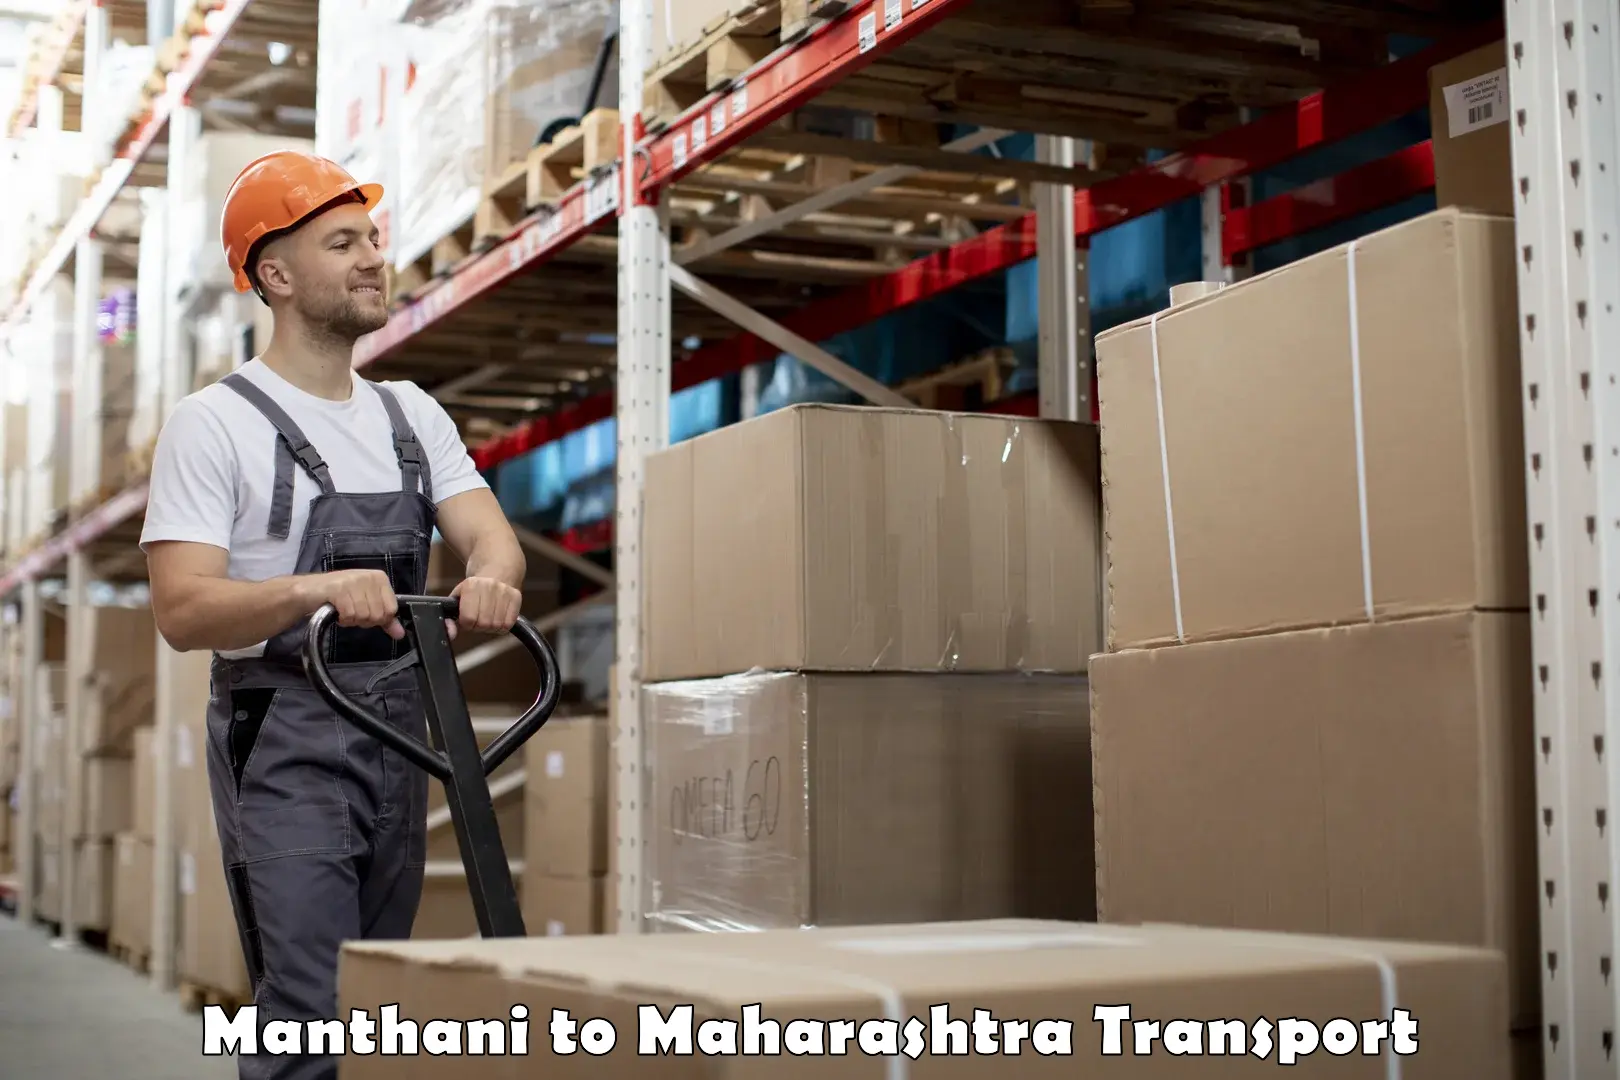 Goods delivery service Manthani to Nagpur